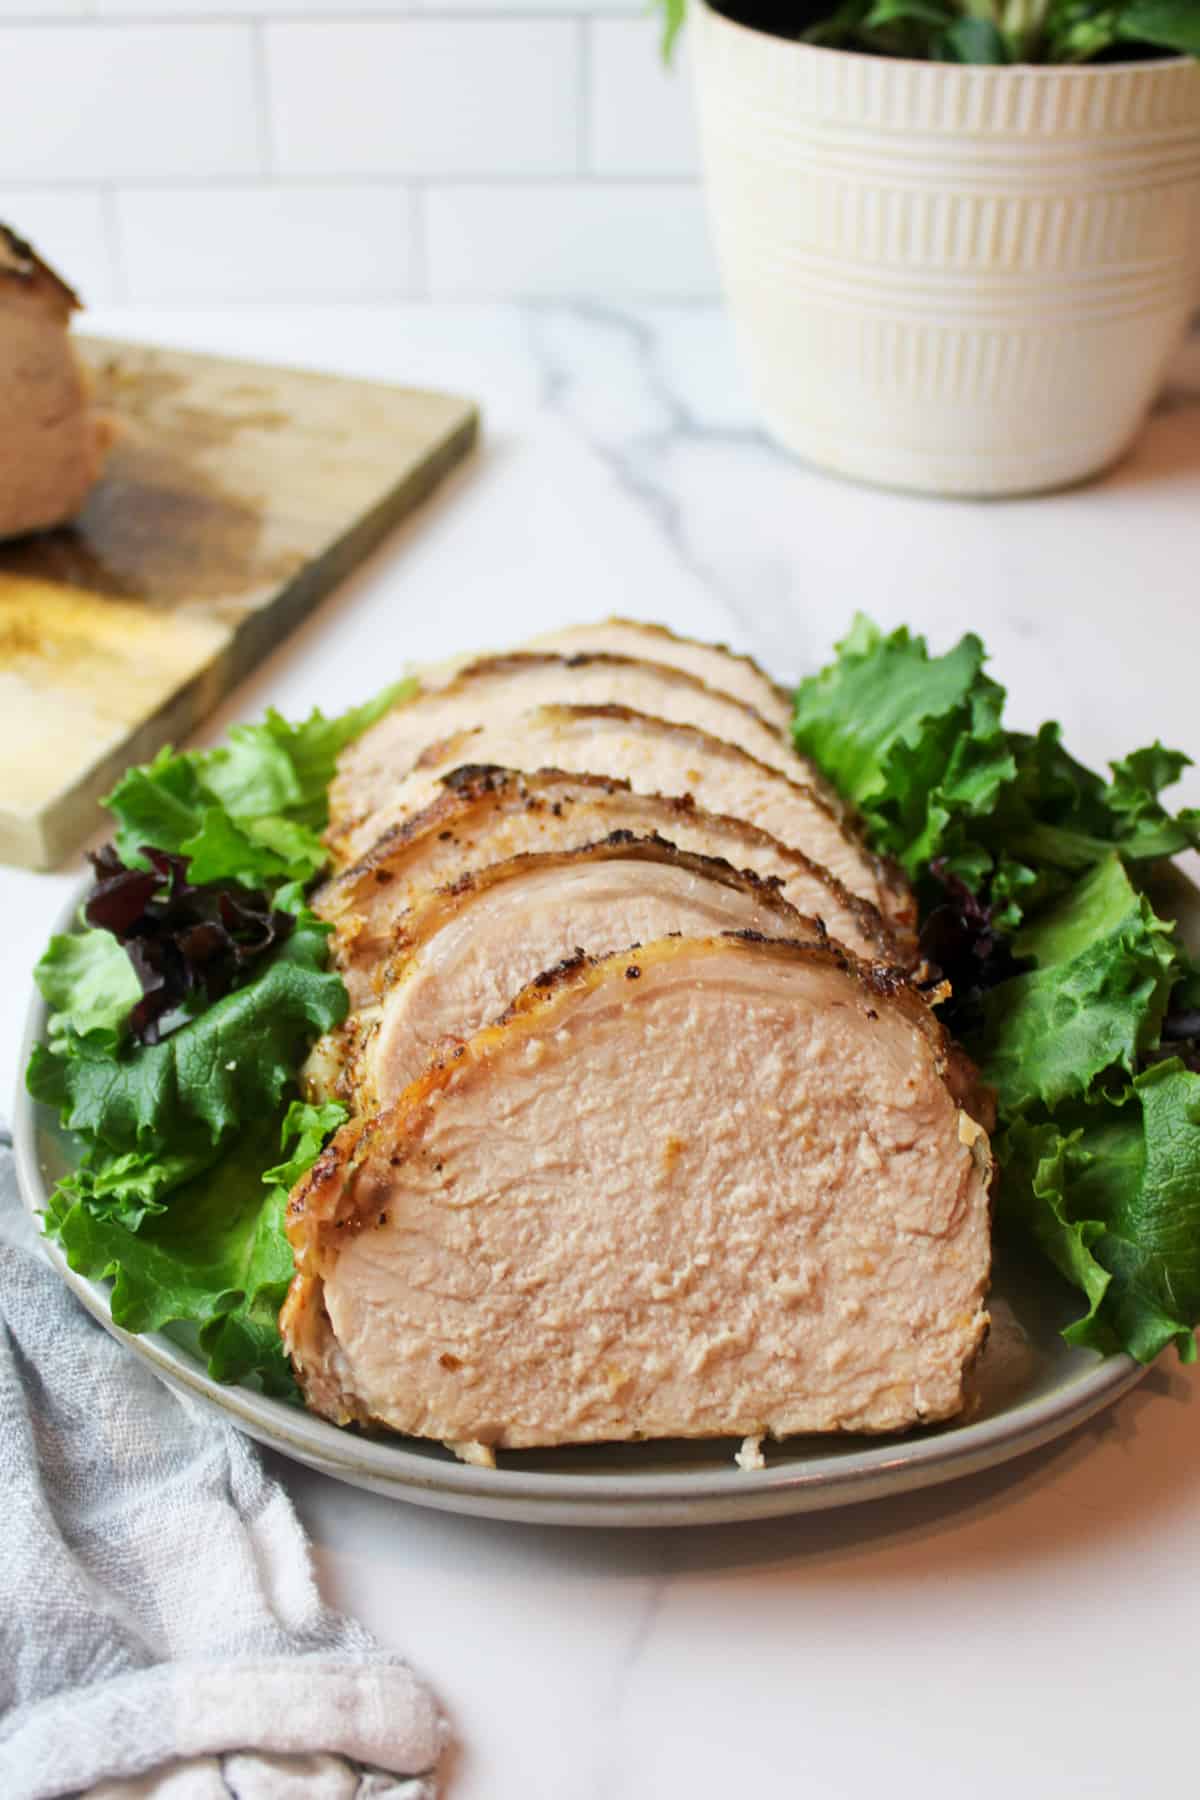 a sliced air fried pork loin on a plate with green leaf lettuce on the sides